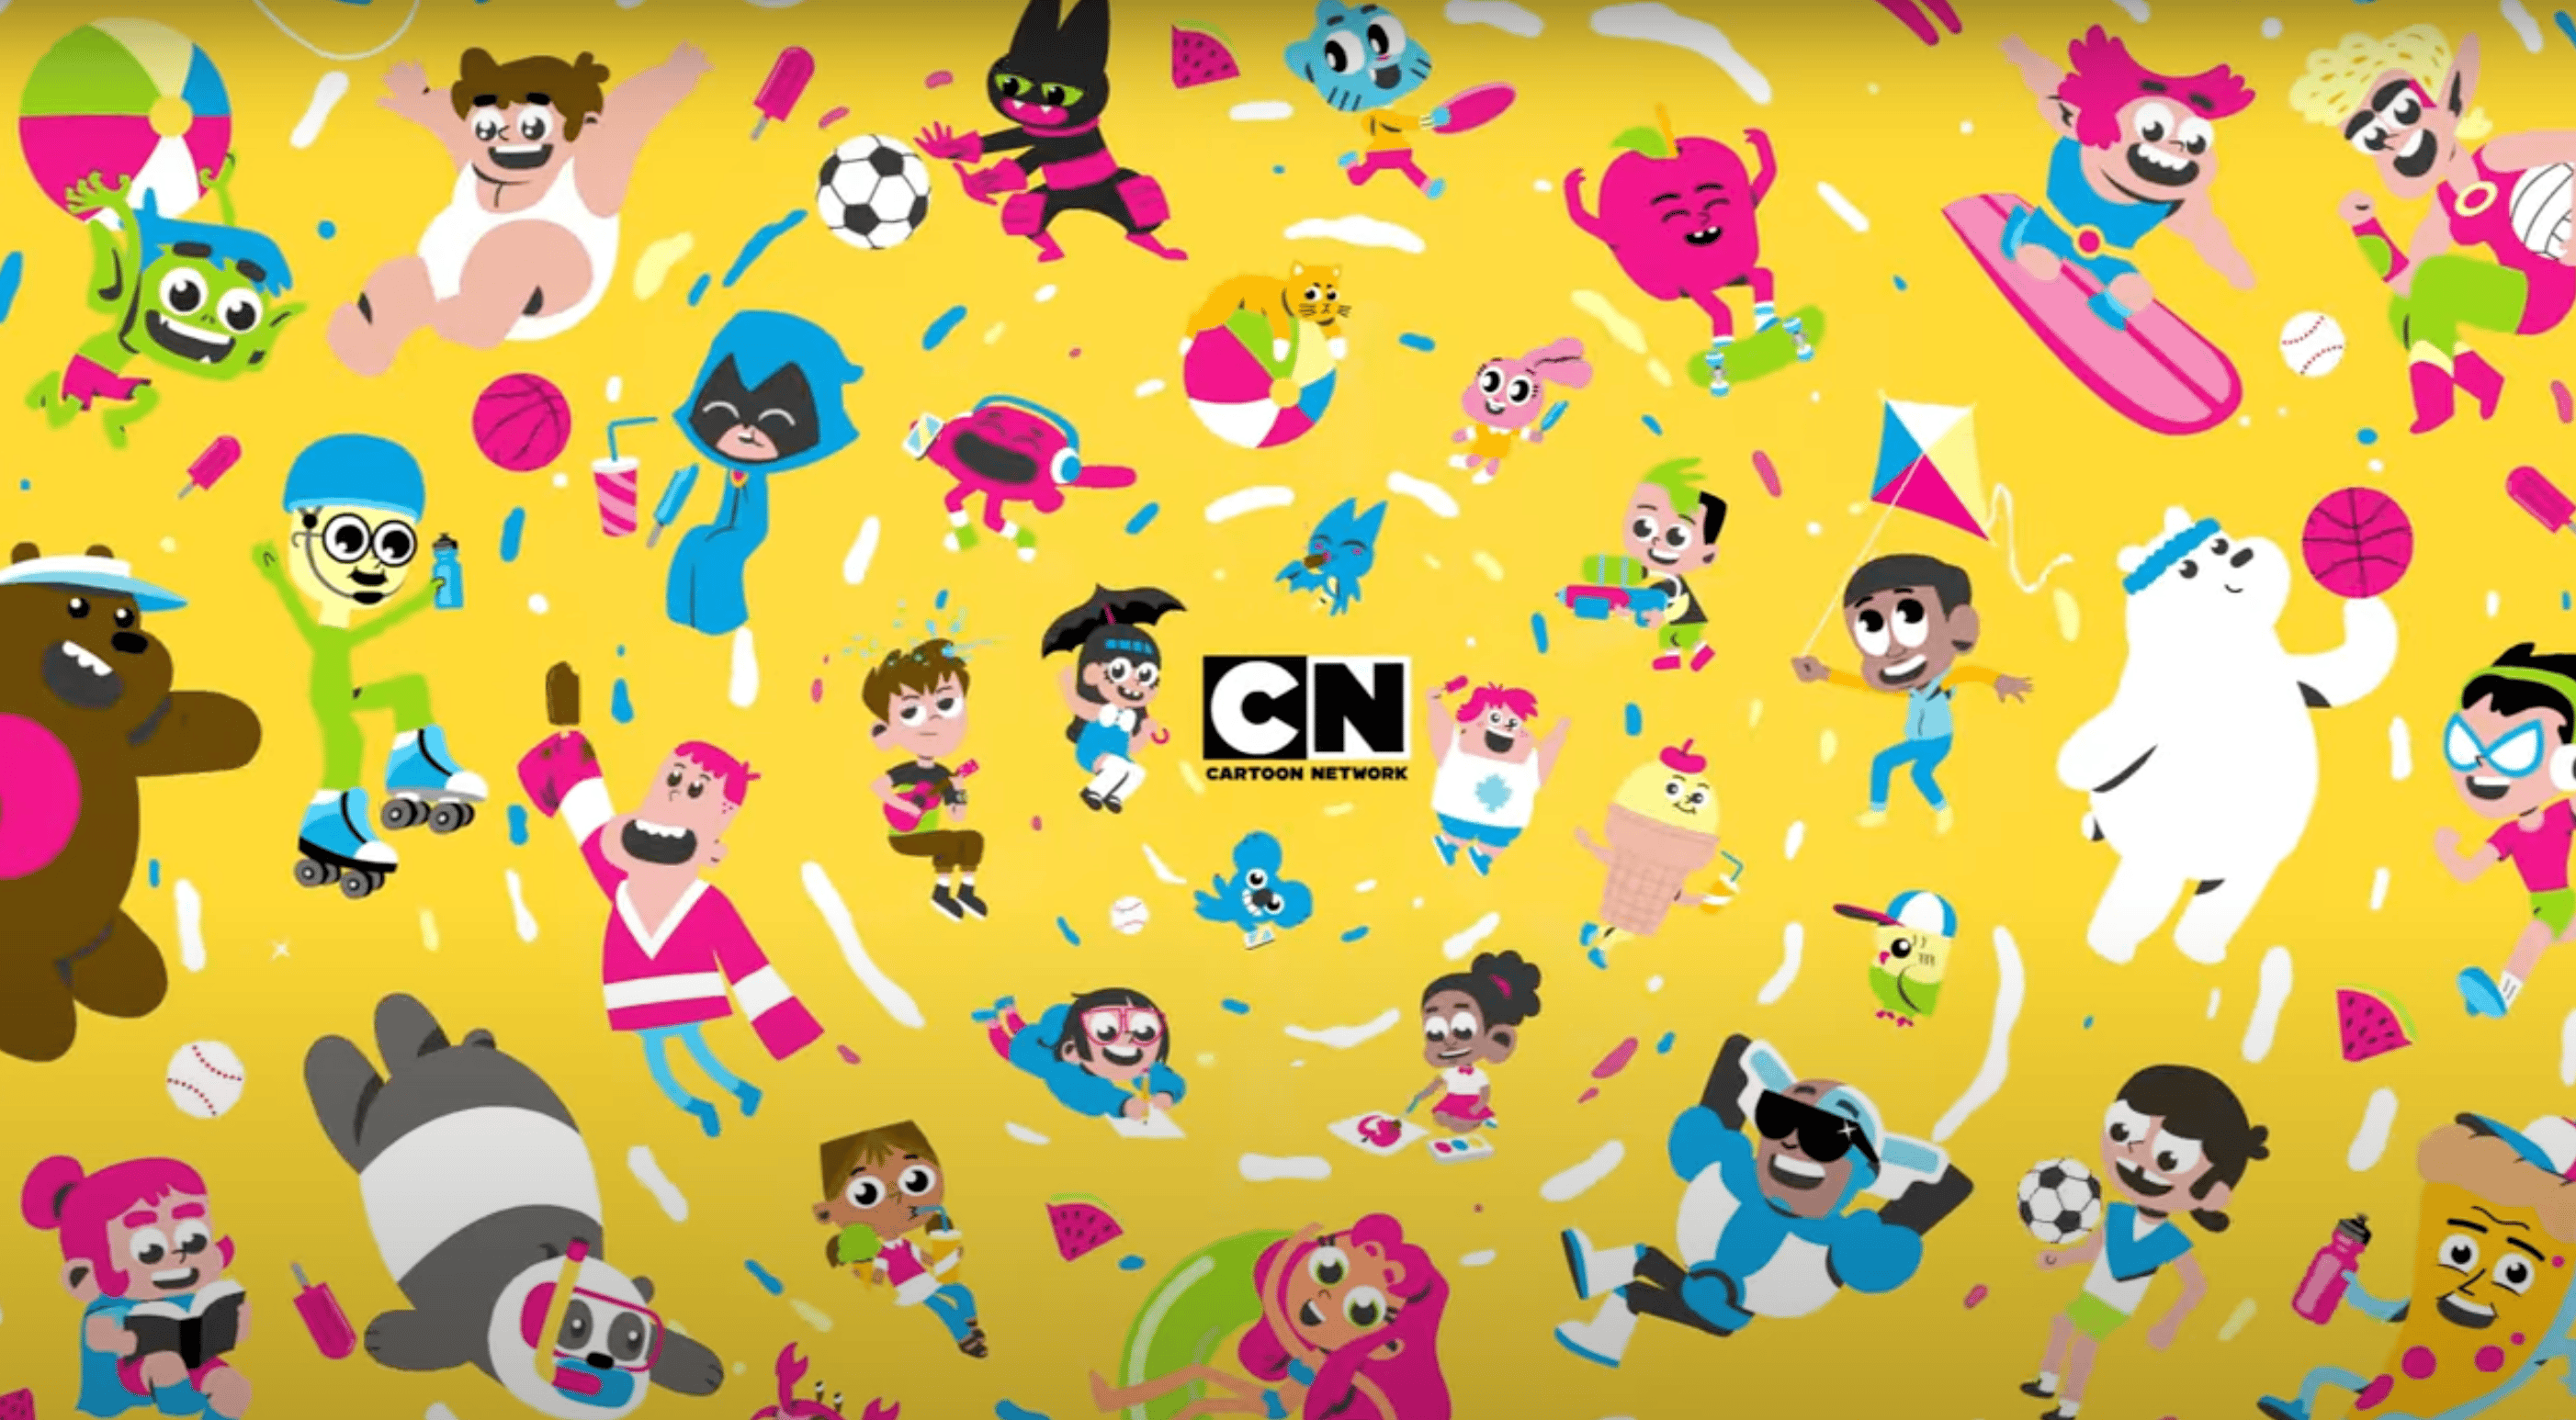 The Cartoon Network logo: the black and white letters CN on a yellow background of colorful characters